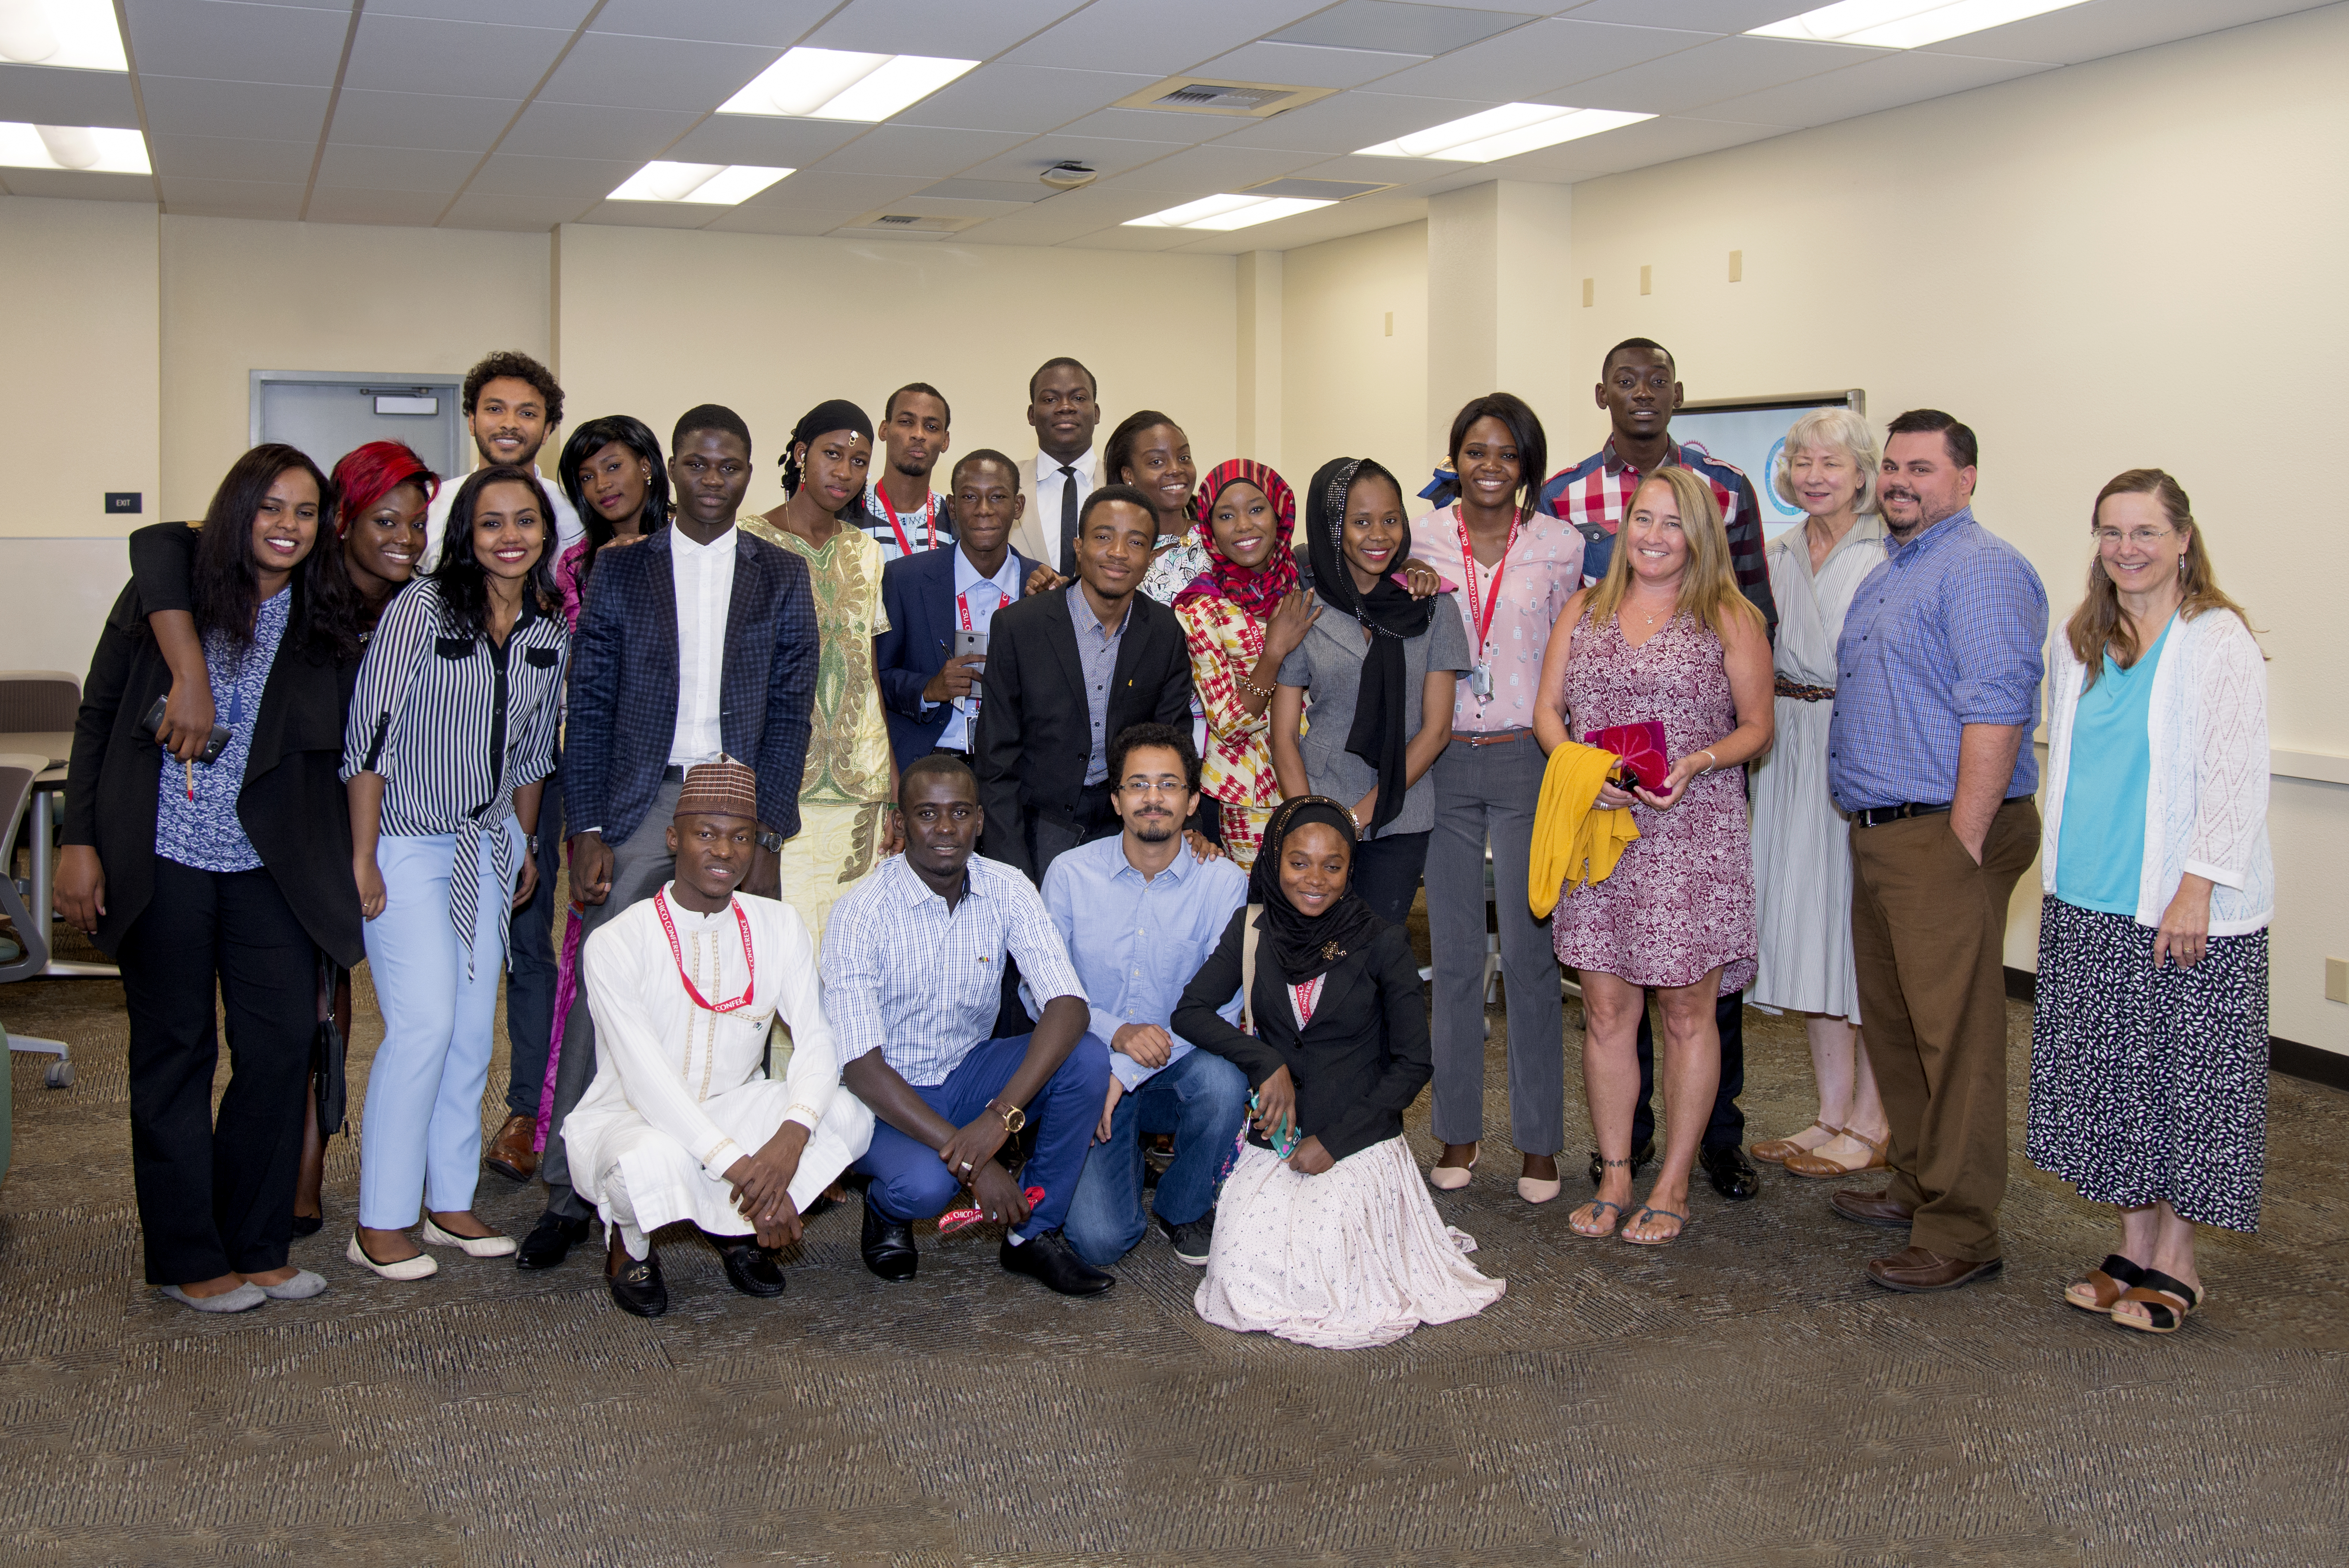 Students after their final presentations for the "Social Entrepreneurship Boot Camp" on August 1, 2016. (Jessica Bartlett/Student Photographer)